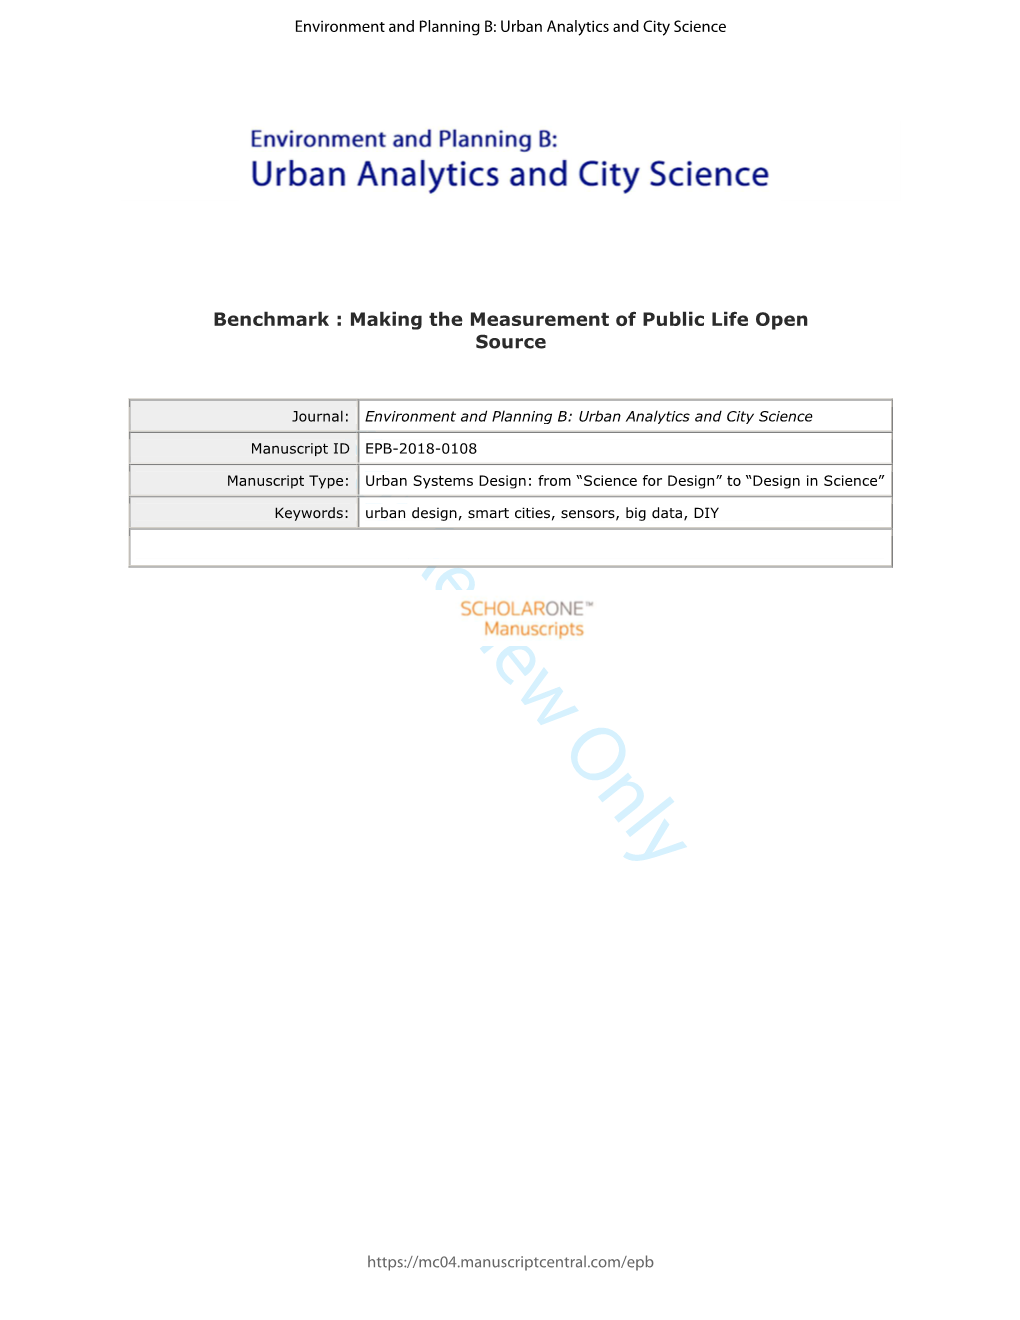 For Review Only 20 Abstract (250 Word Limit) 21 22 23 Urban Designers Have Measured the Quality of Urban Spaces Since the Field Began